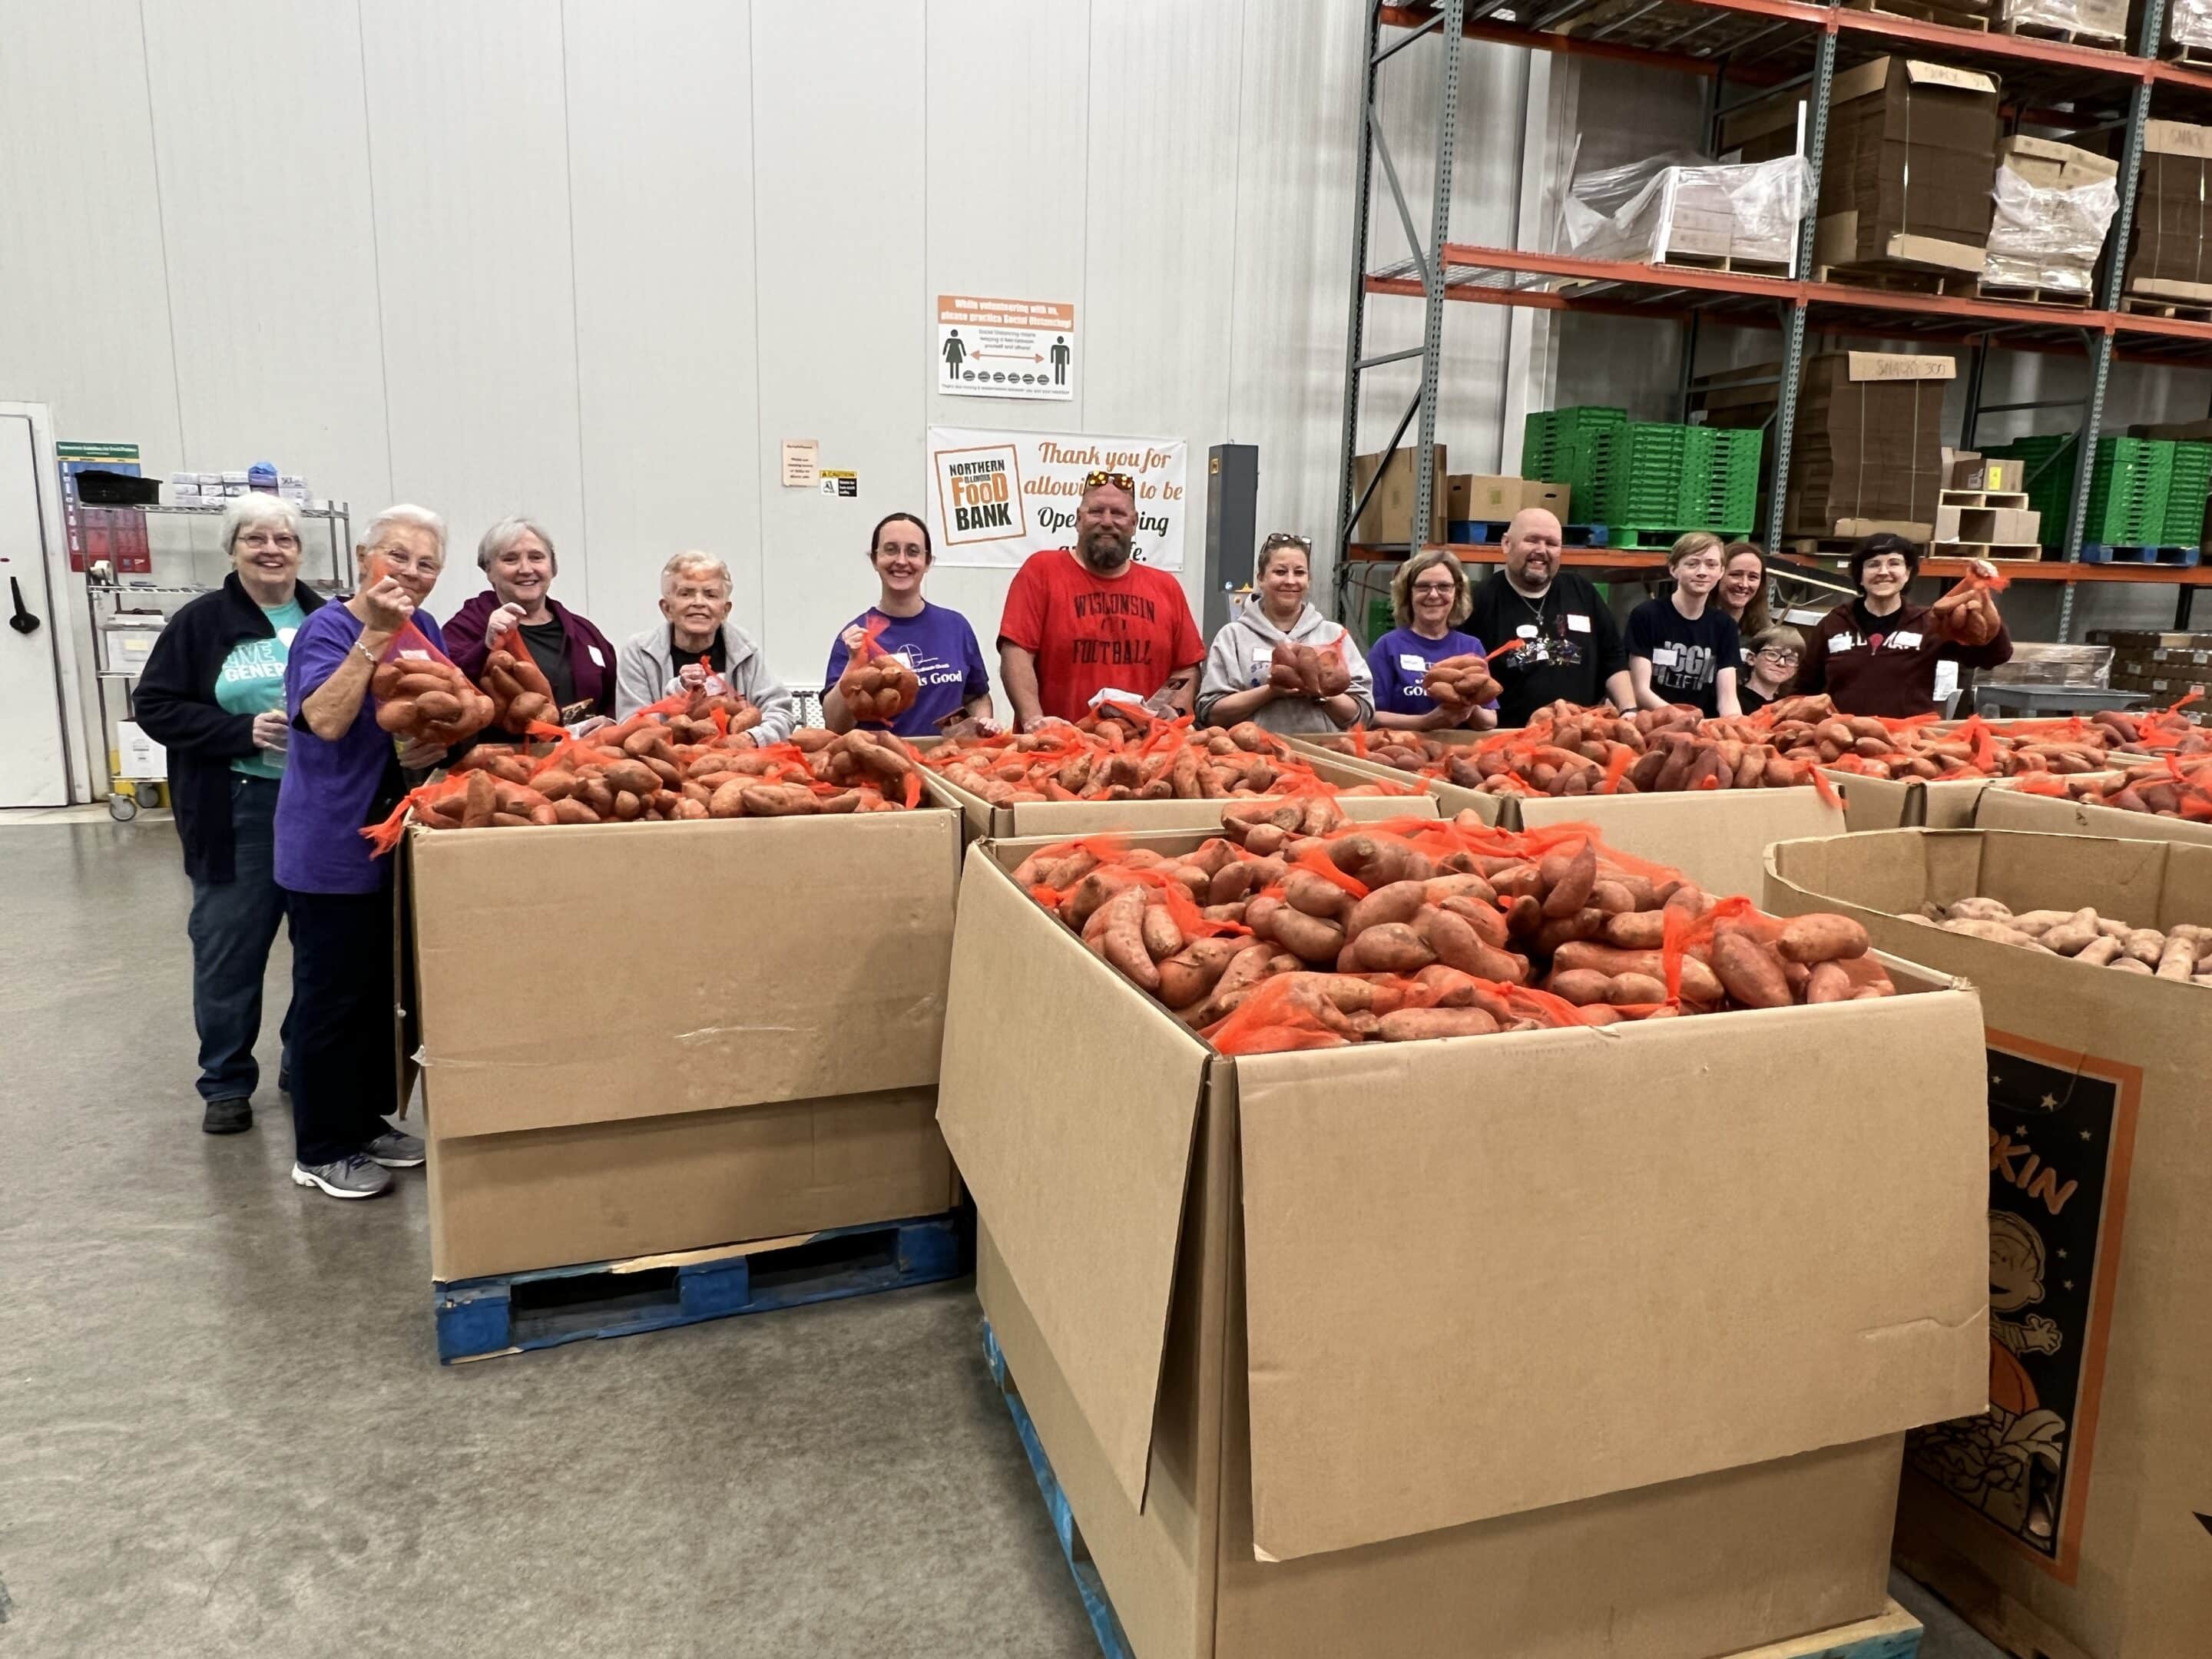 Intergenerational volunteers at the food bank